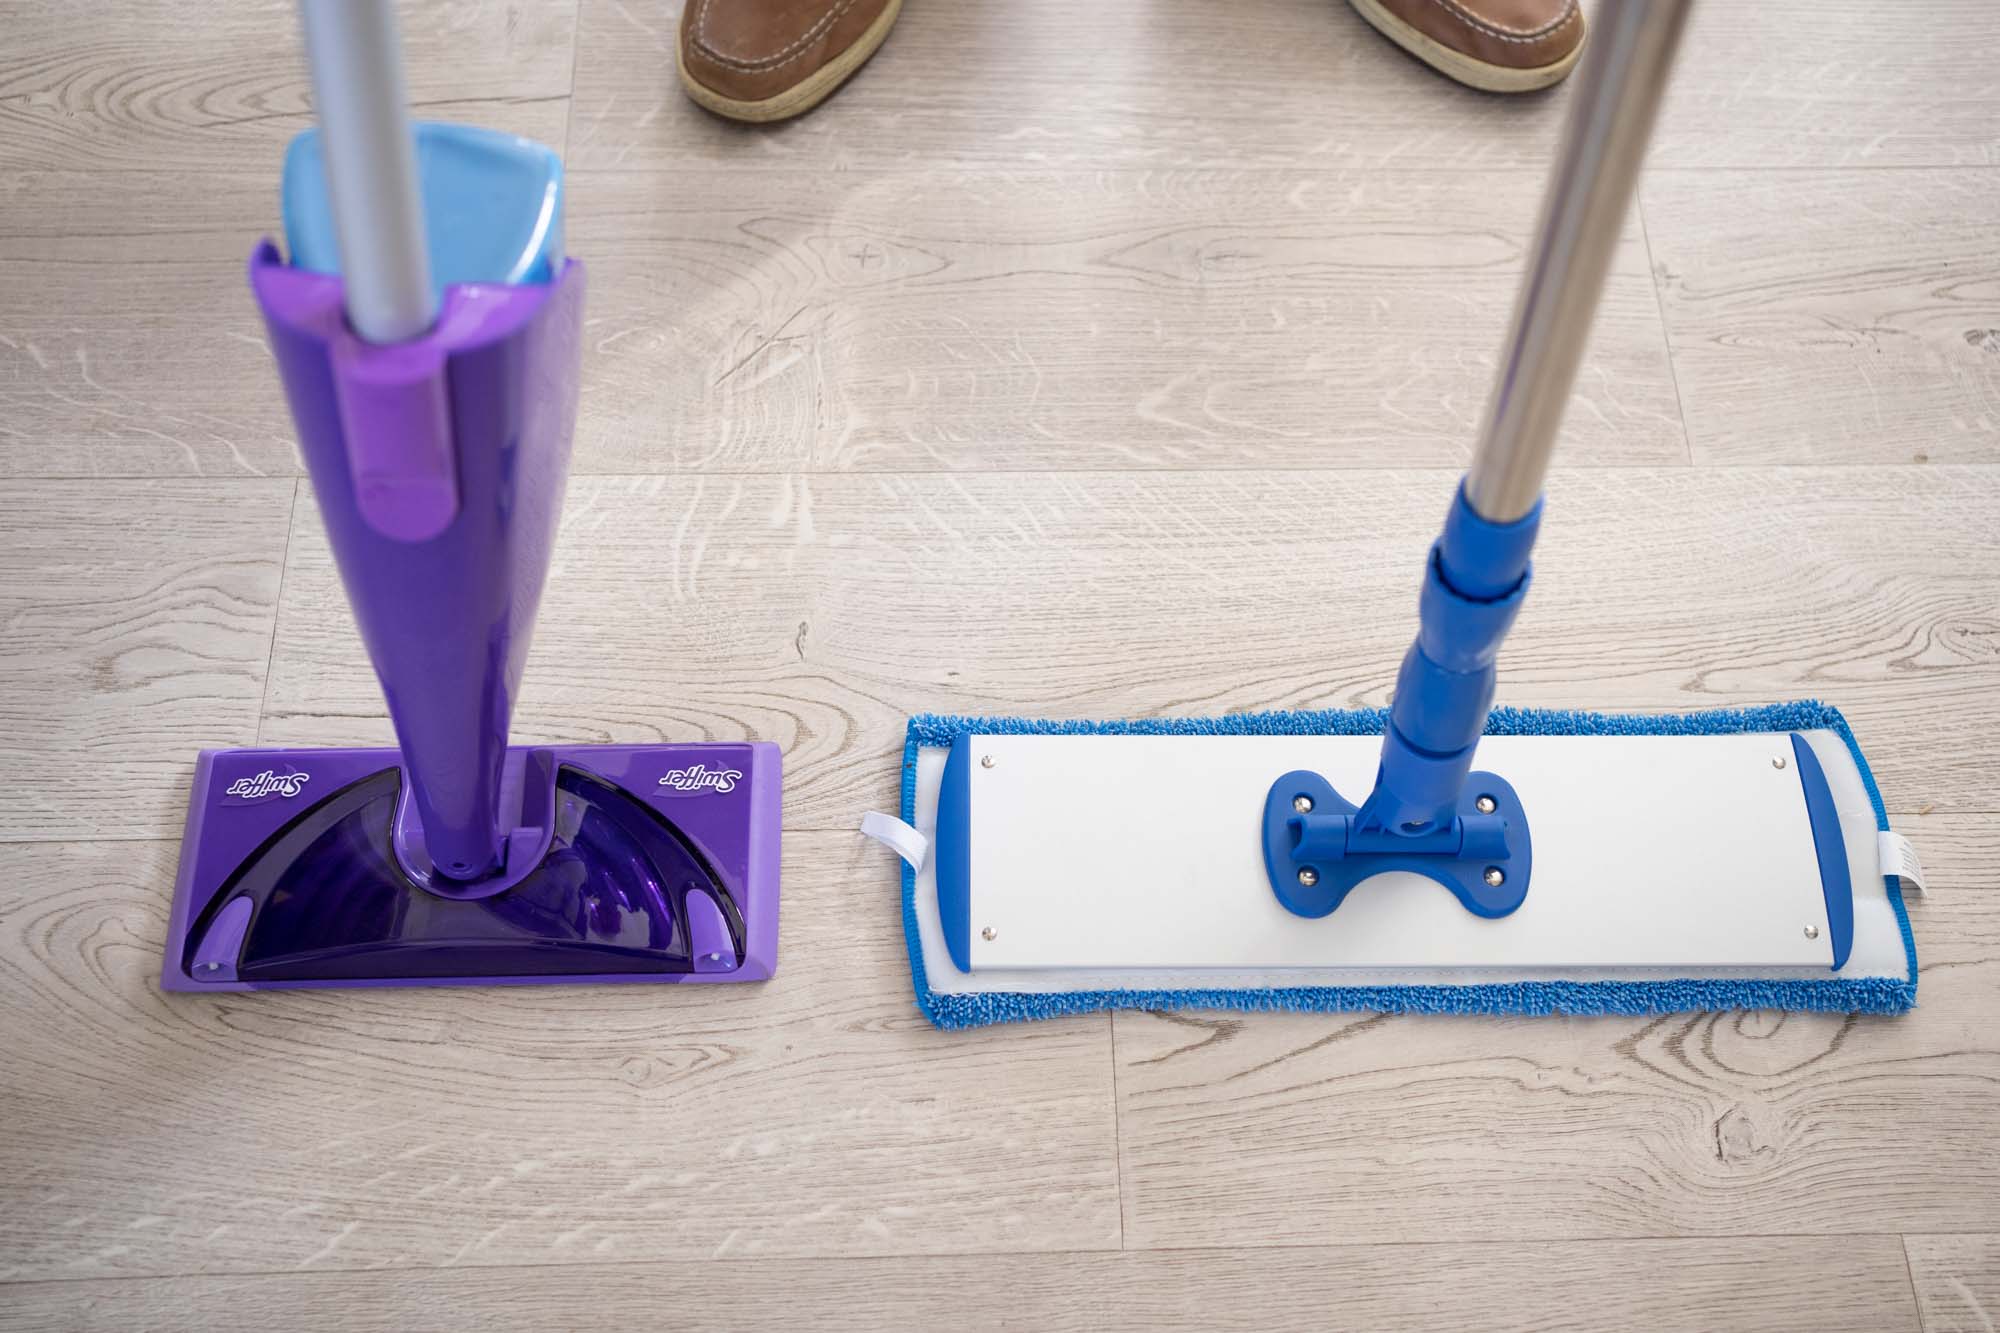 The Choosing the Best Mop for Laminate Floors Reviews 2023, by Riddia007